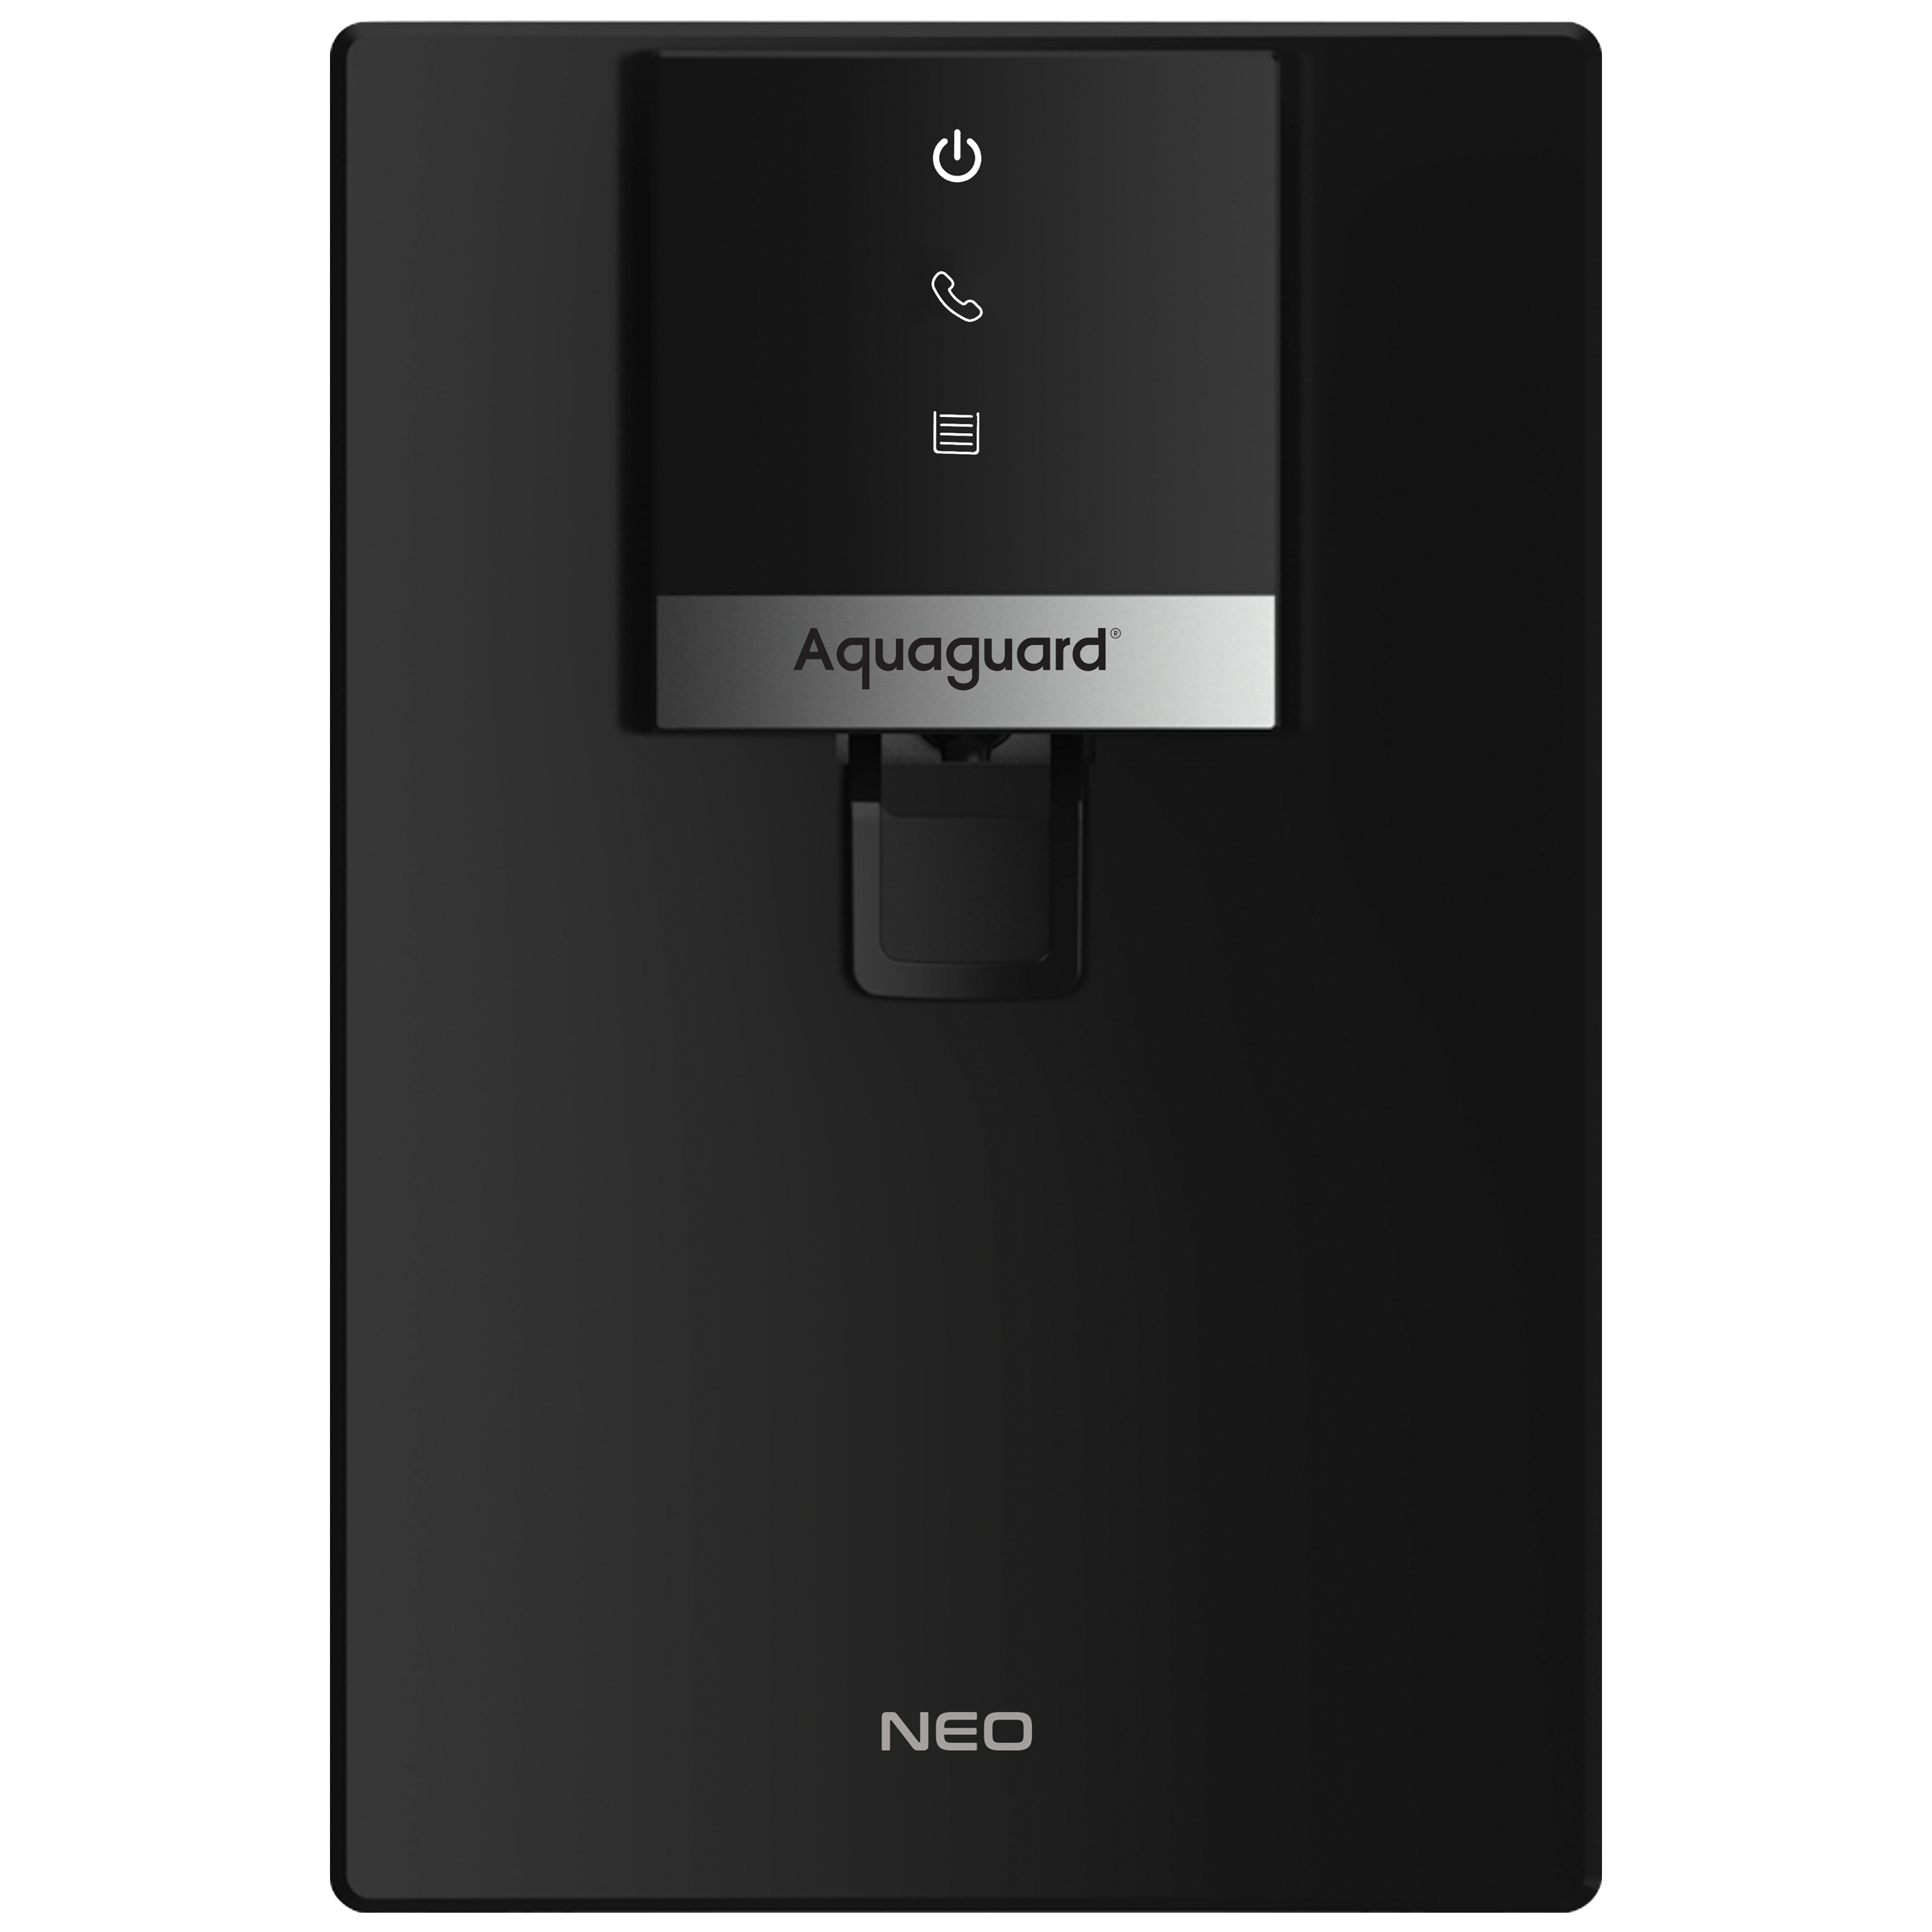 Aquaguard Neo UV + UF + MC Electrical Water Purifier (Mineral Charge Technology, GWPDNUVUF00000, Black/Chrome Metallic)_1